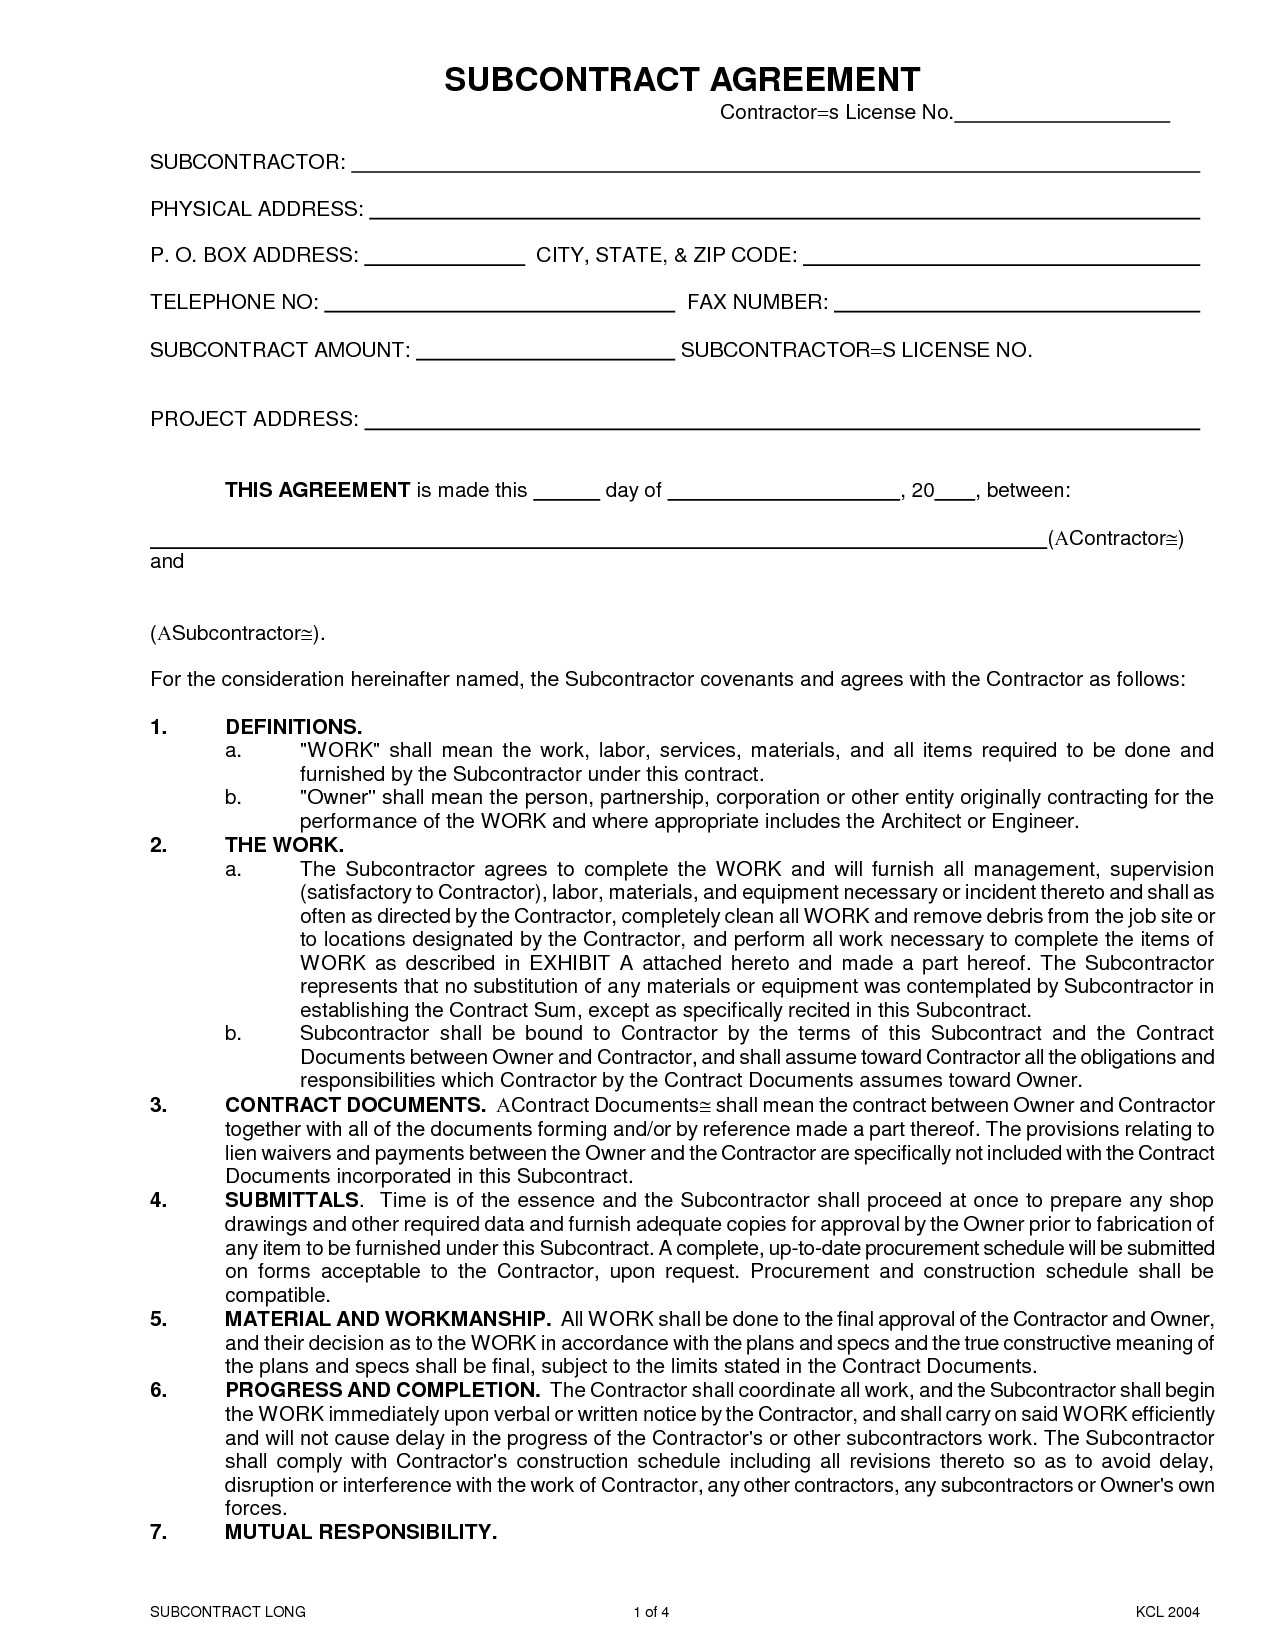 Subcontractor Agreement Template Free Search Results Sub Subcontractor Agreement